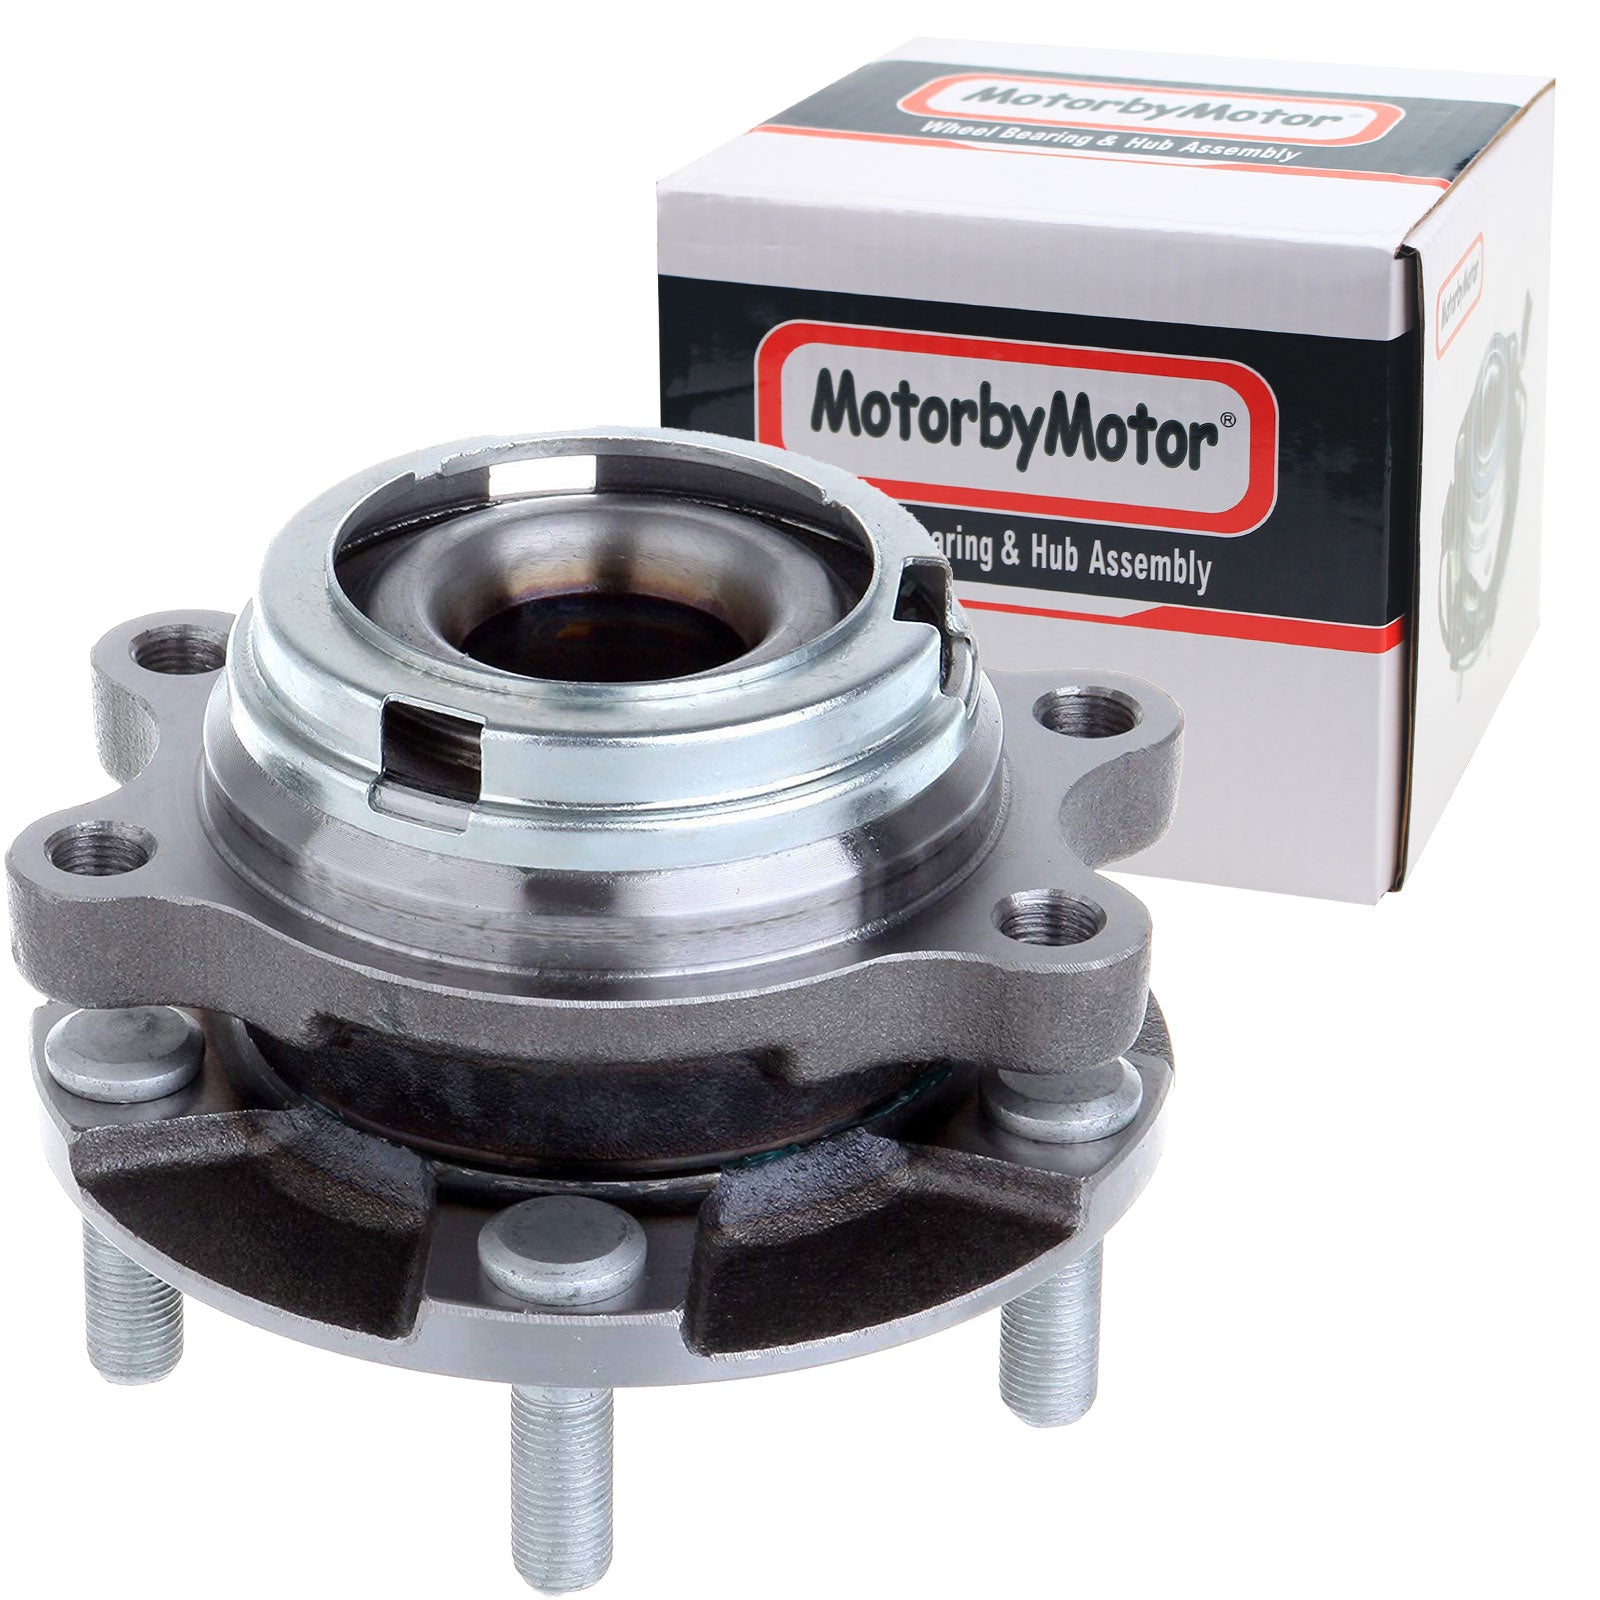 MotorbyMotor HA590125 Front Wheel Bearing and Hub Assembly w/5 Lugs for Infiniti EX35 EX37 FX35 FX37 FX45 FX50 G25 G35 G37 M35 M37 M45 M56 Q40 Q50 Q60 Q70 QX50 QX70 Hub Bearing (AWD) MotorbyMotor